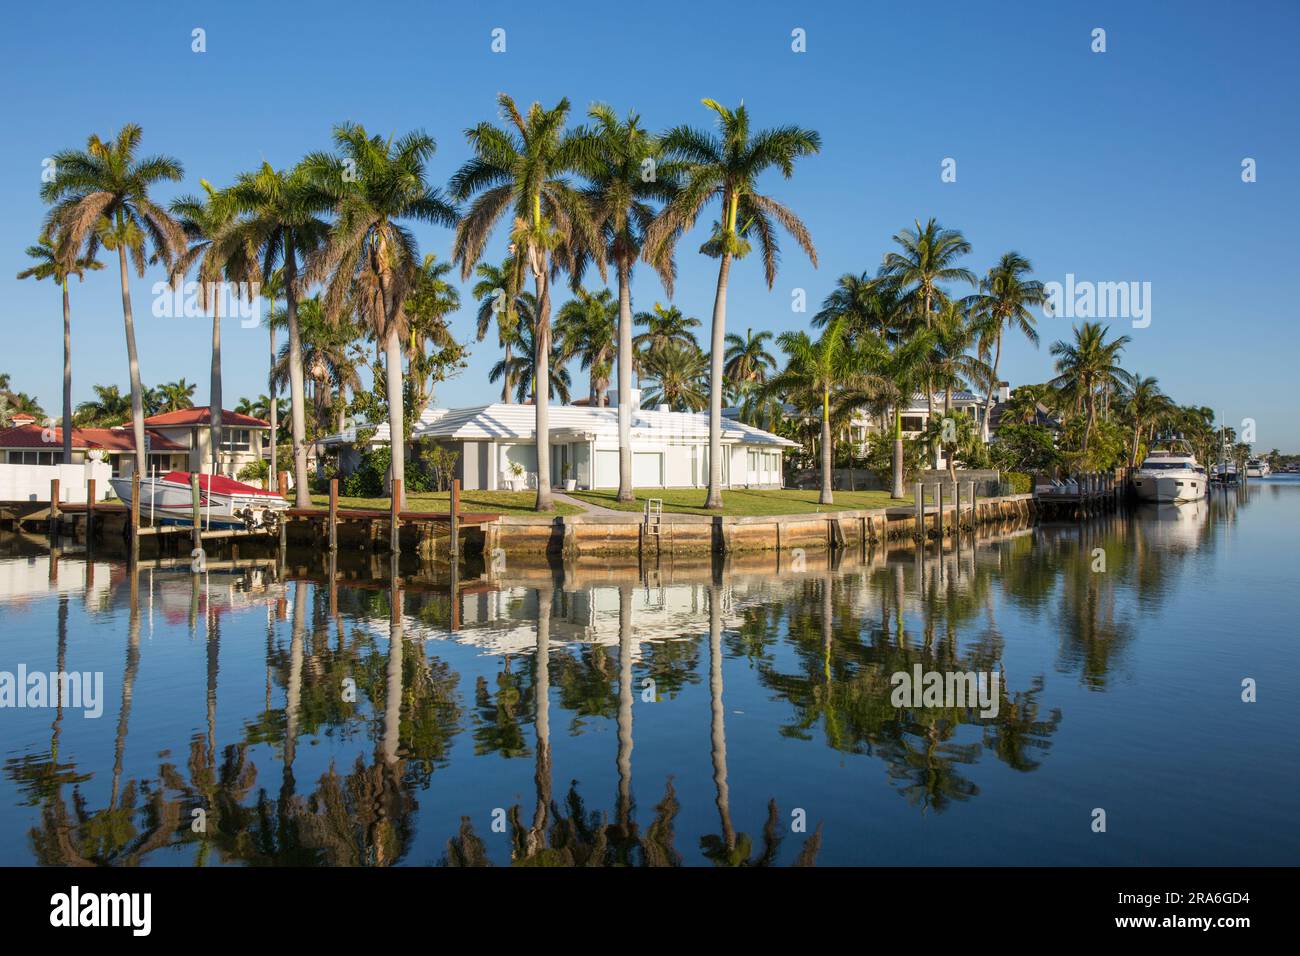 Fort Lauderdale, Florida, USA. View across tranquil waterway in the Nurmi Isles district, early morning, royal palms reflected in still water. Stock Photo